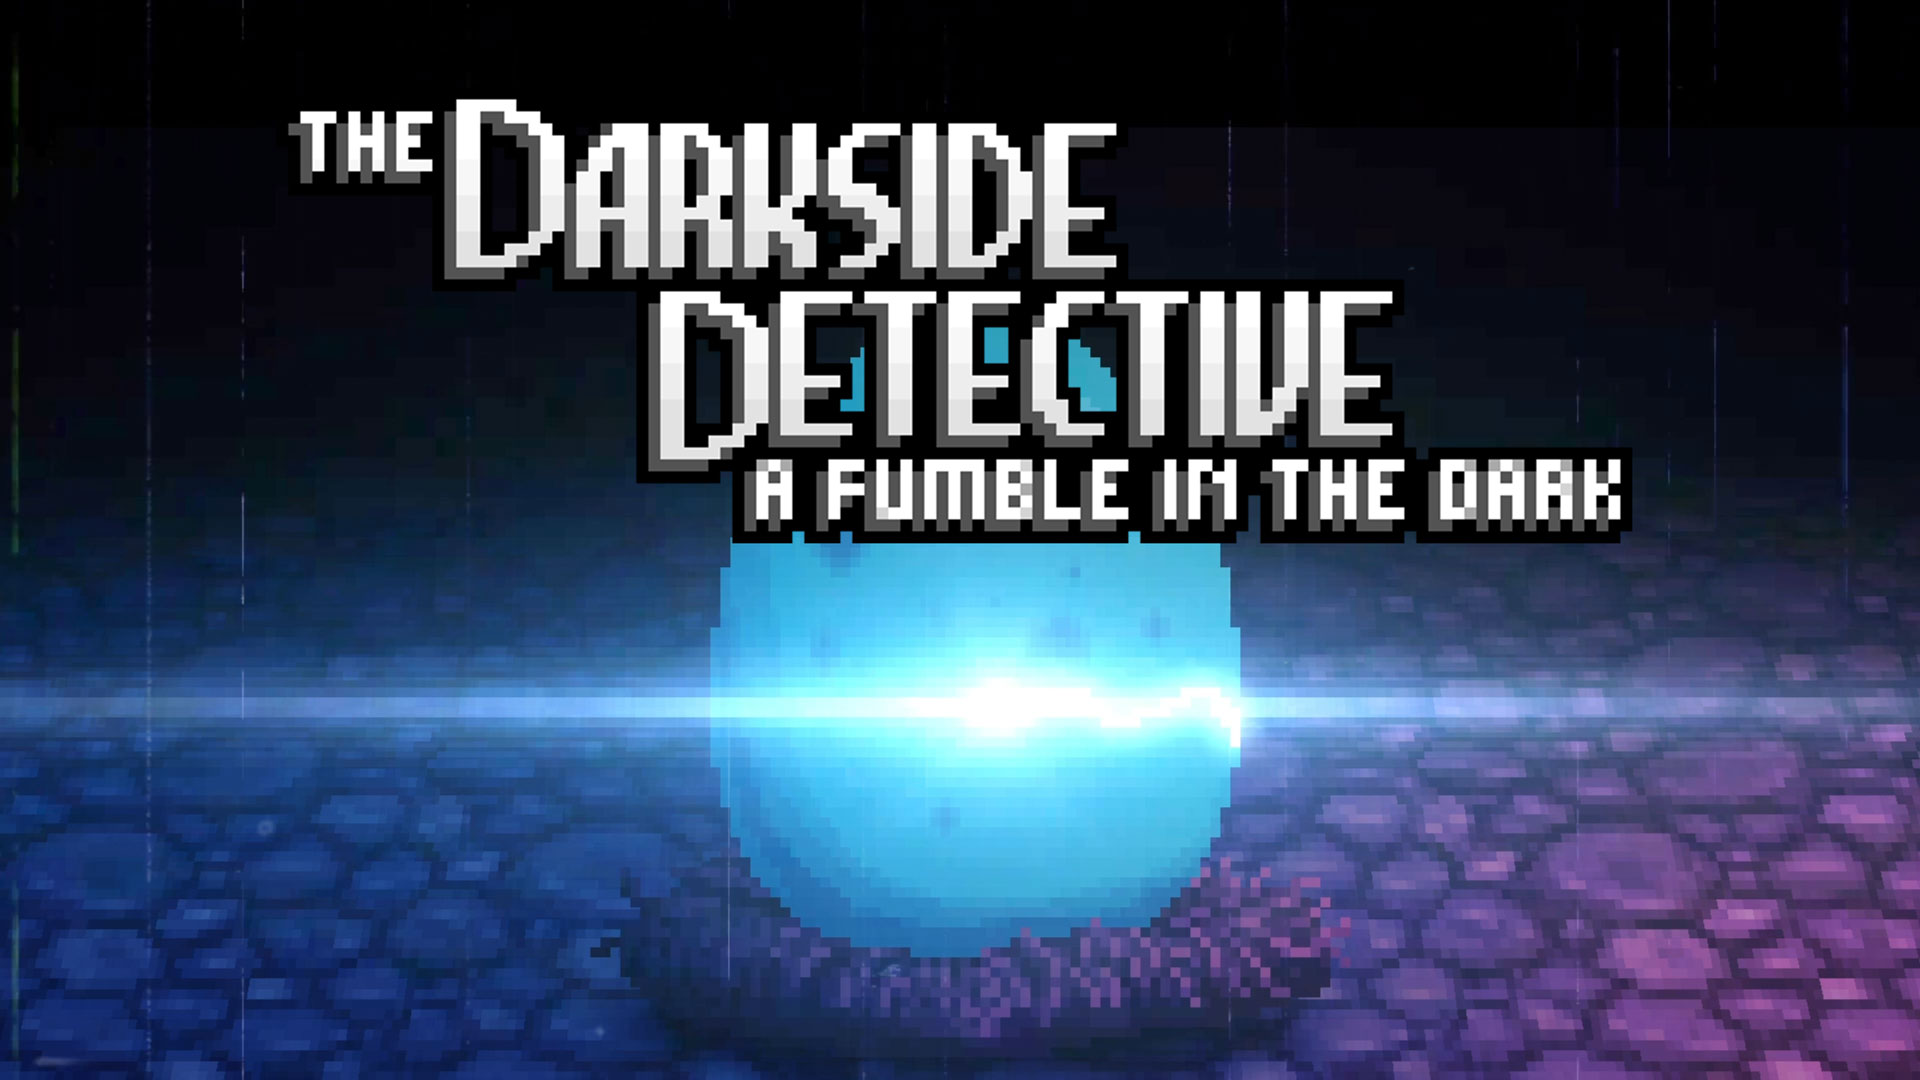 Video For What Is the Thunderbird and Why Is the Darkside Detective Centering a Case on It?